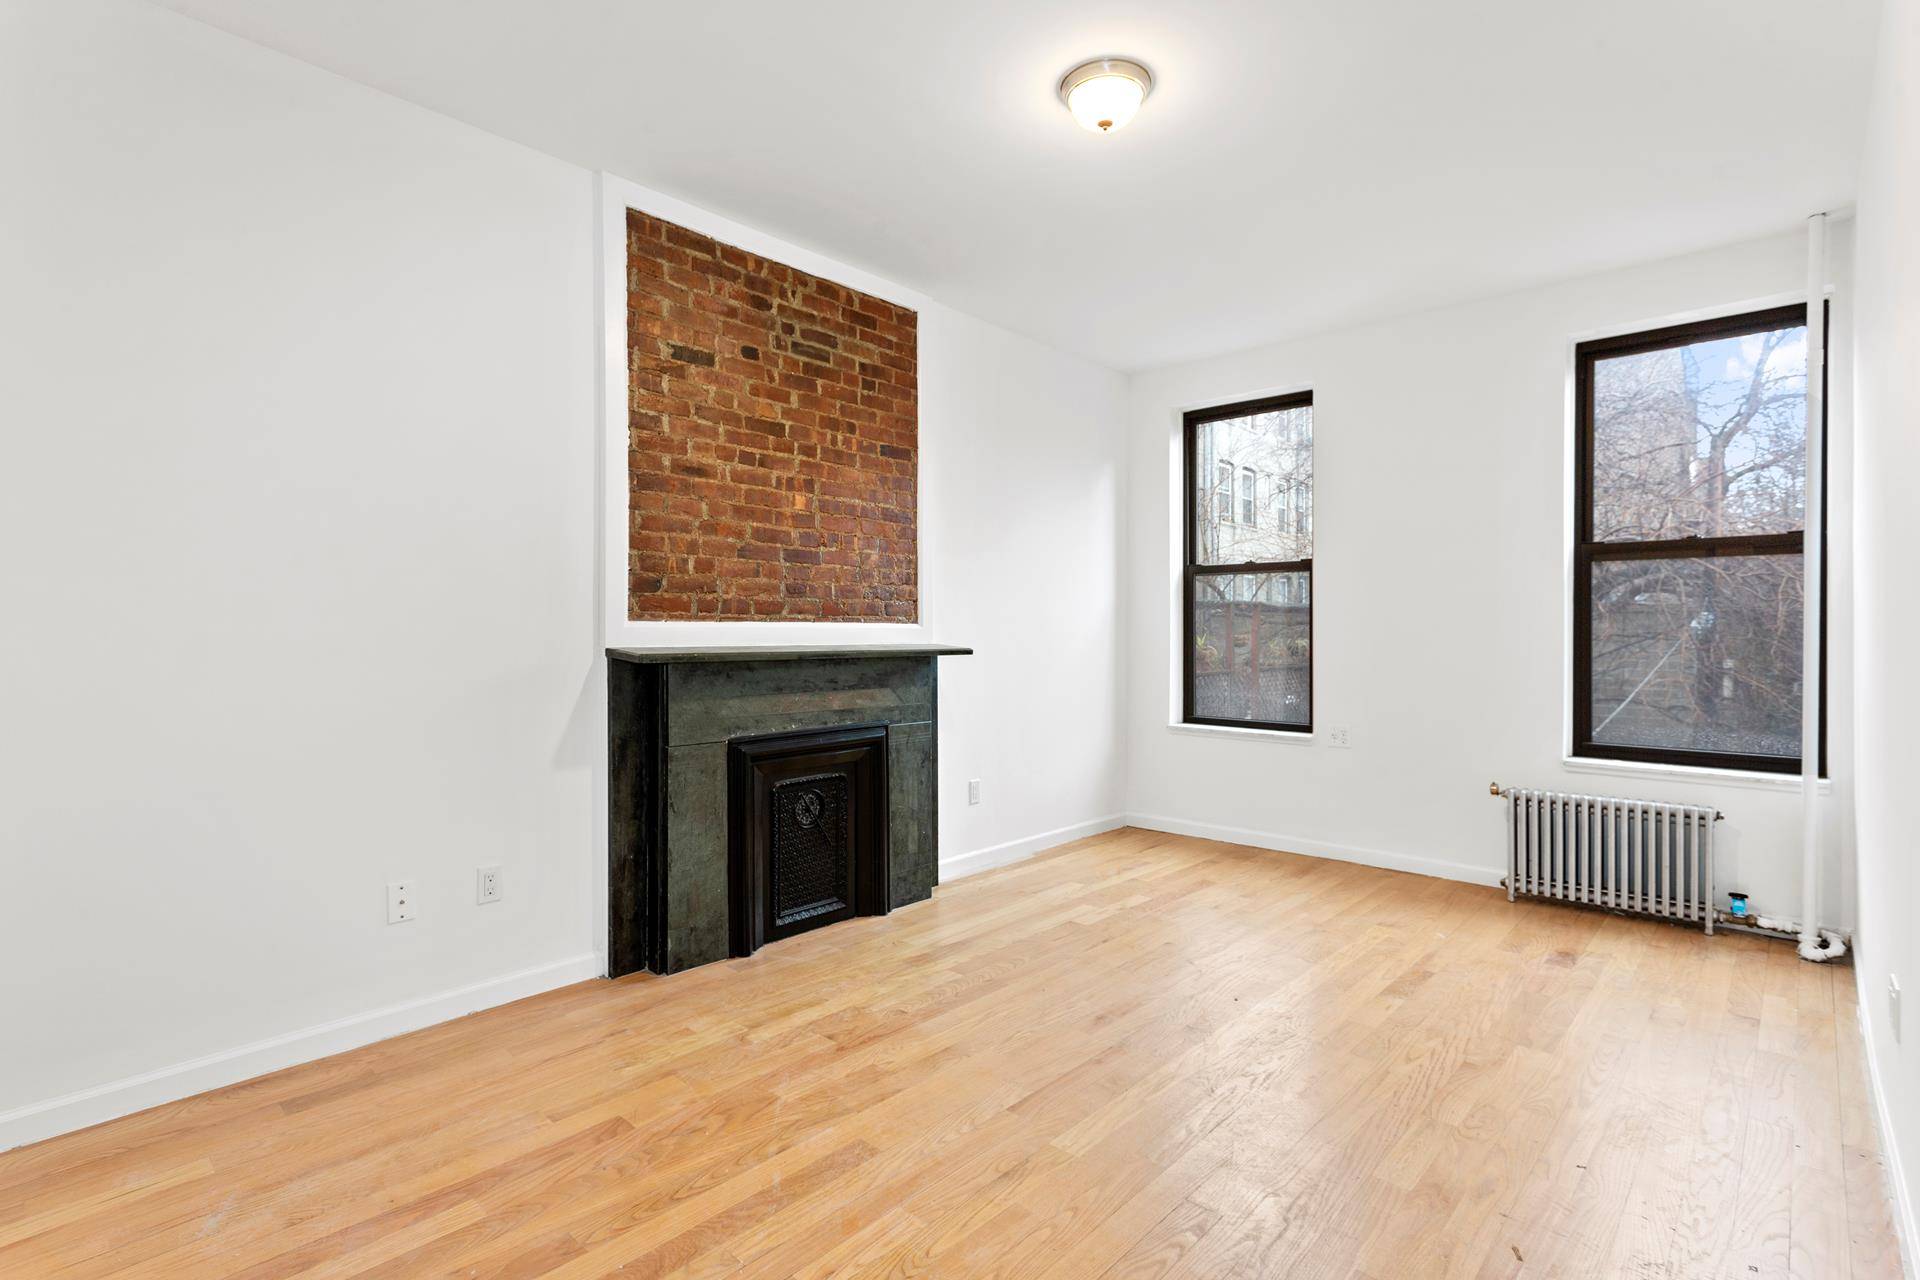 Presenting 103 107 Smith Street a beautiful prewar apartment building divided into a collection studio to 2 bedroom layouts on vibrant Smith Street in the heart of Cobble Boerum Hill.